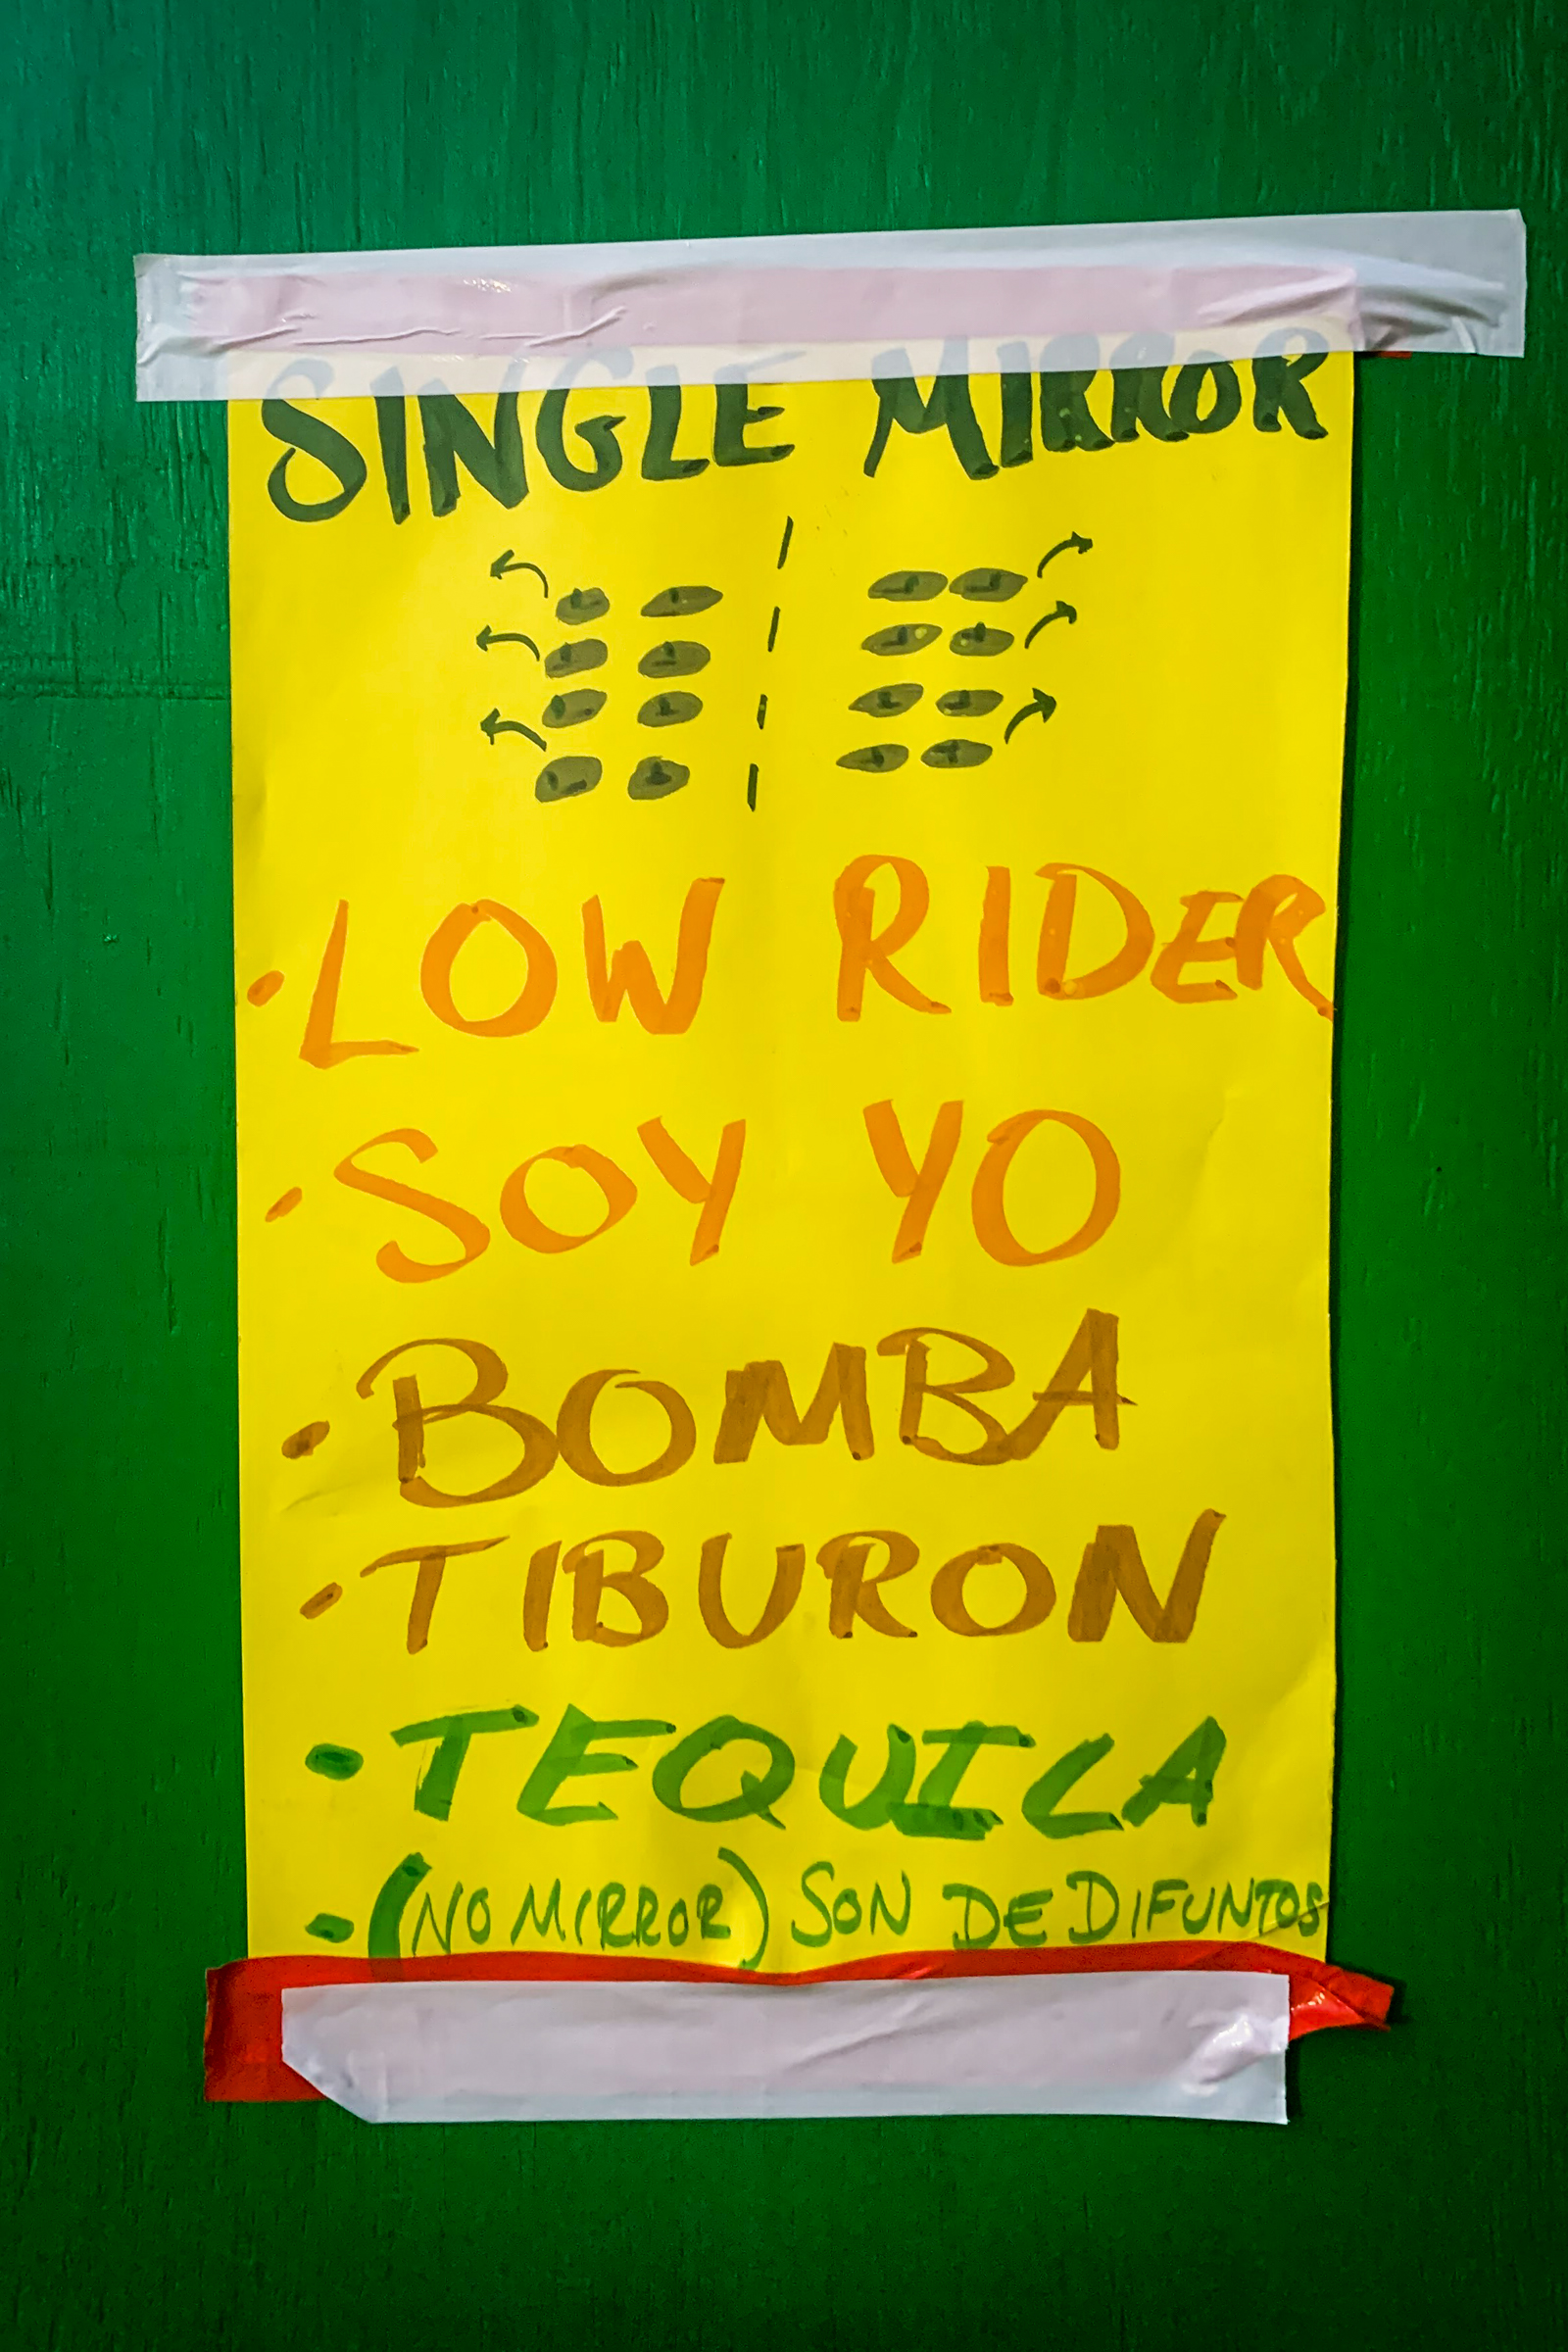 Song lineup for Lucha Krewe performances